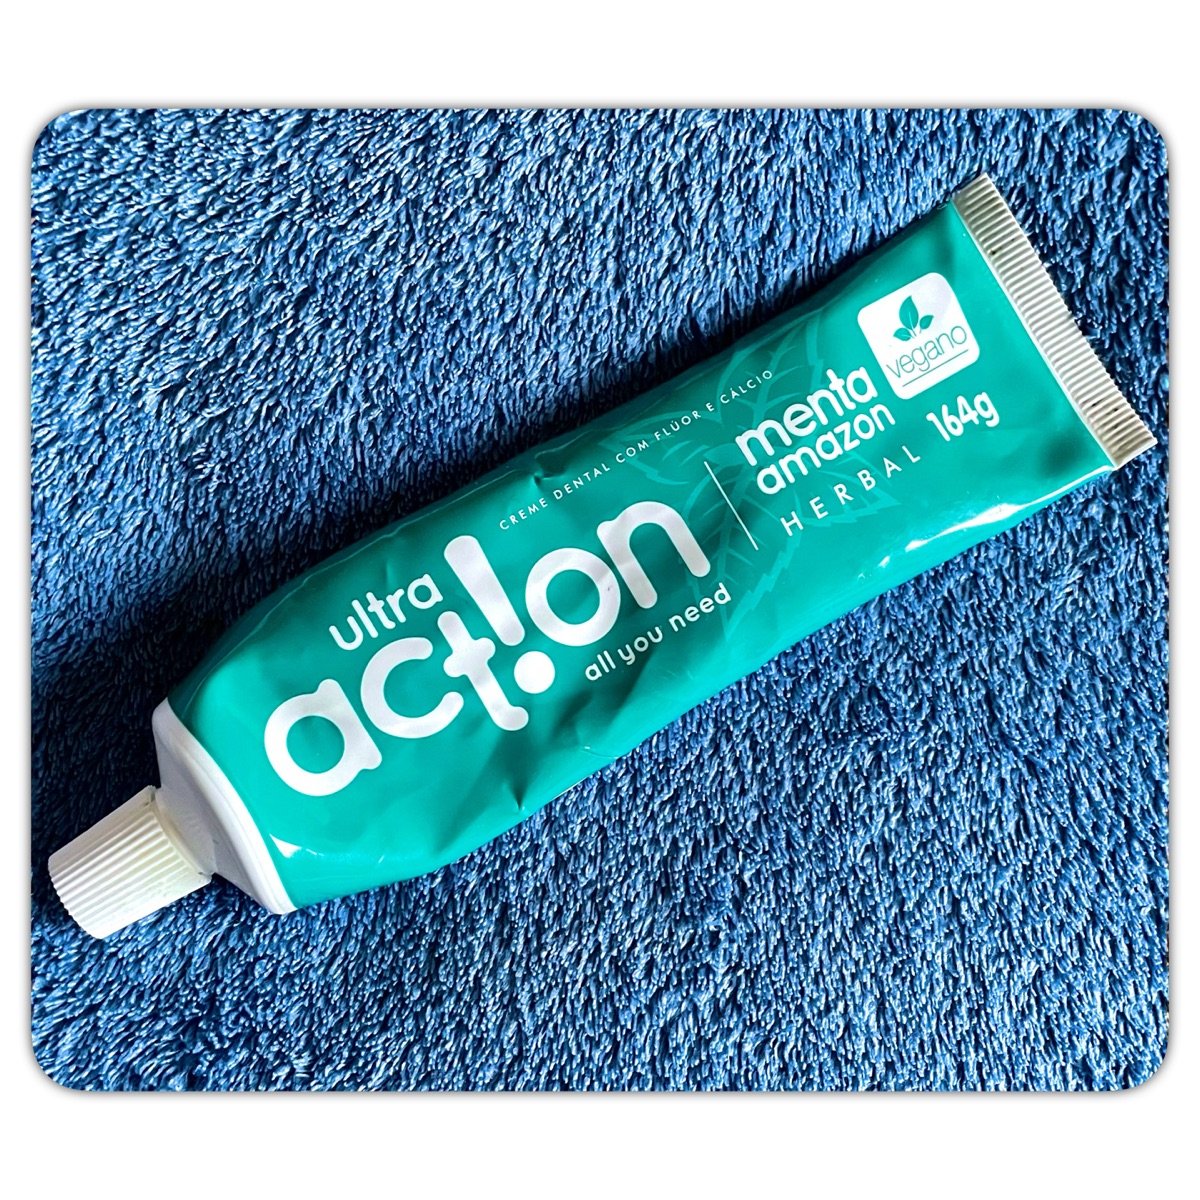 Classy Brands creme dental ultra action - all you need Reviews | abillion